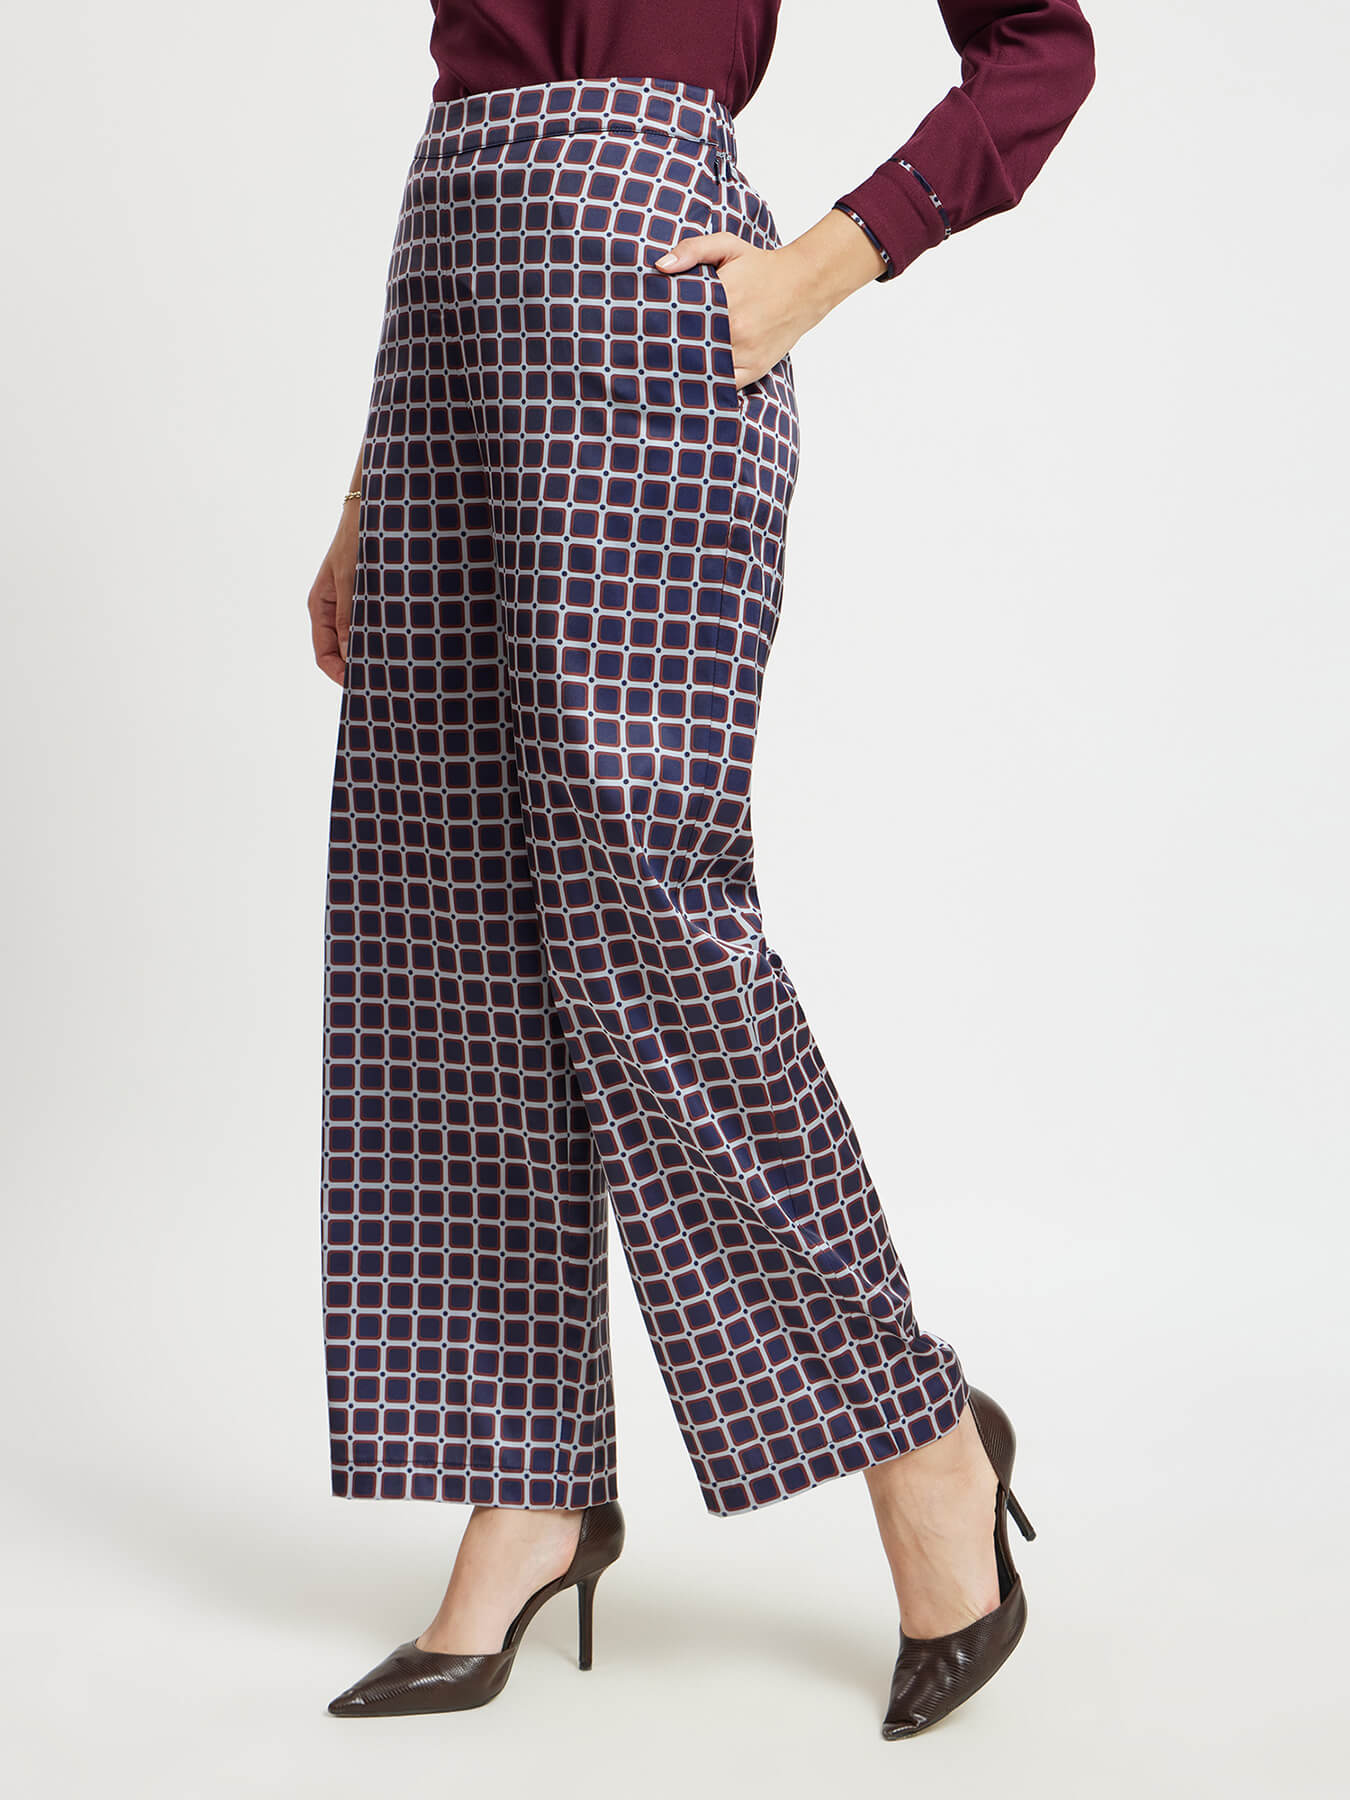 Satin Geometric Print Trousers - Navy And Maroon